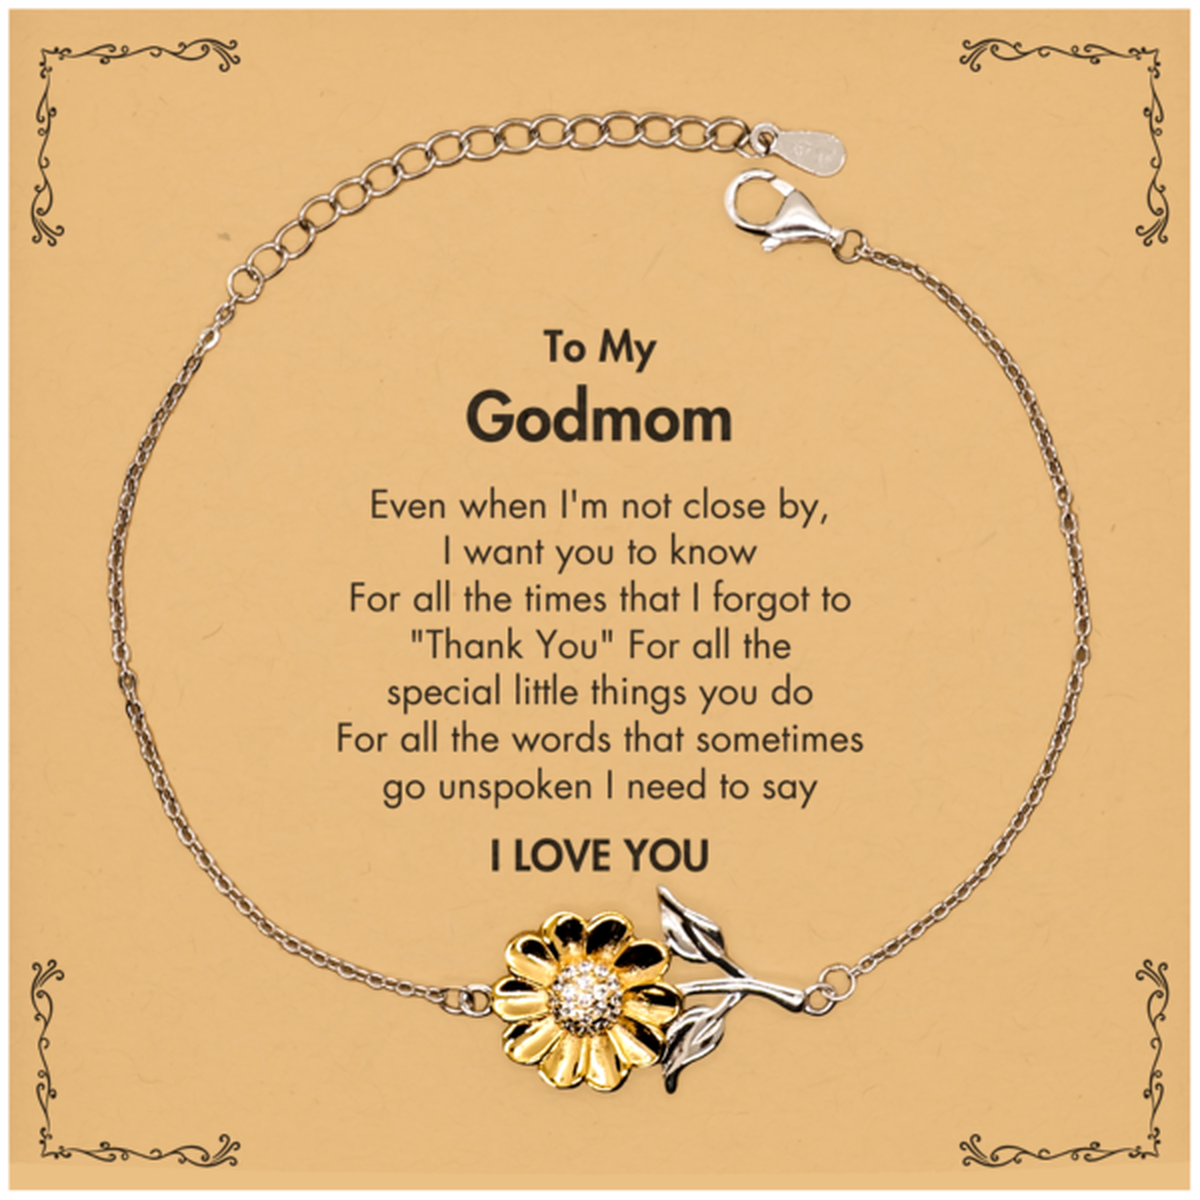 Thank You Gifts for Godmom, Keepsake Sunflower Bracelet Gifts for Godmom Birthday Mother's day Father's Day Godmom For all the words That sometimes go unspoken I need to say I LOVE YOU